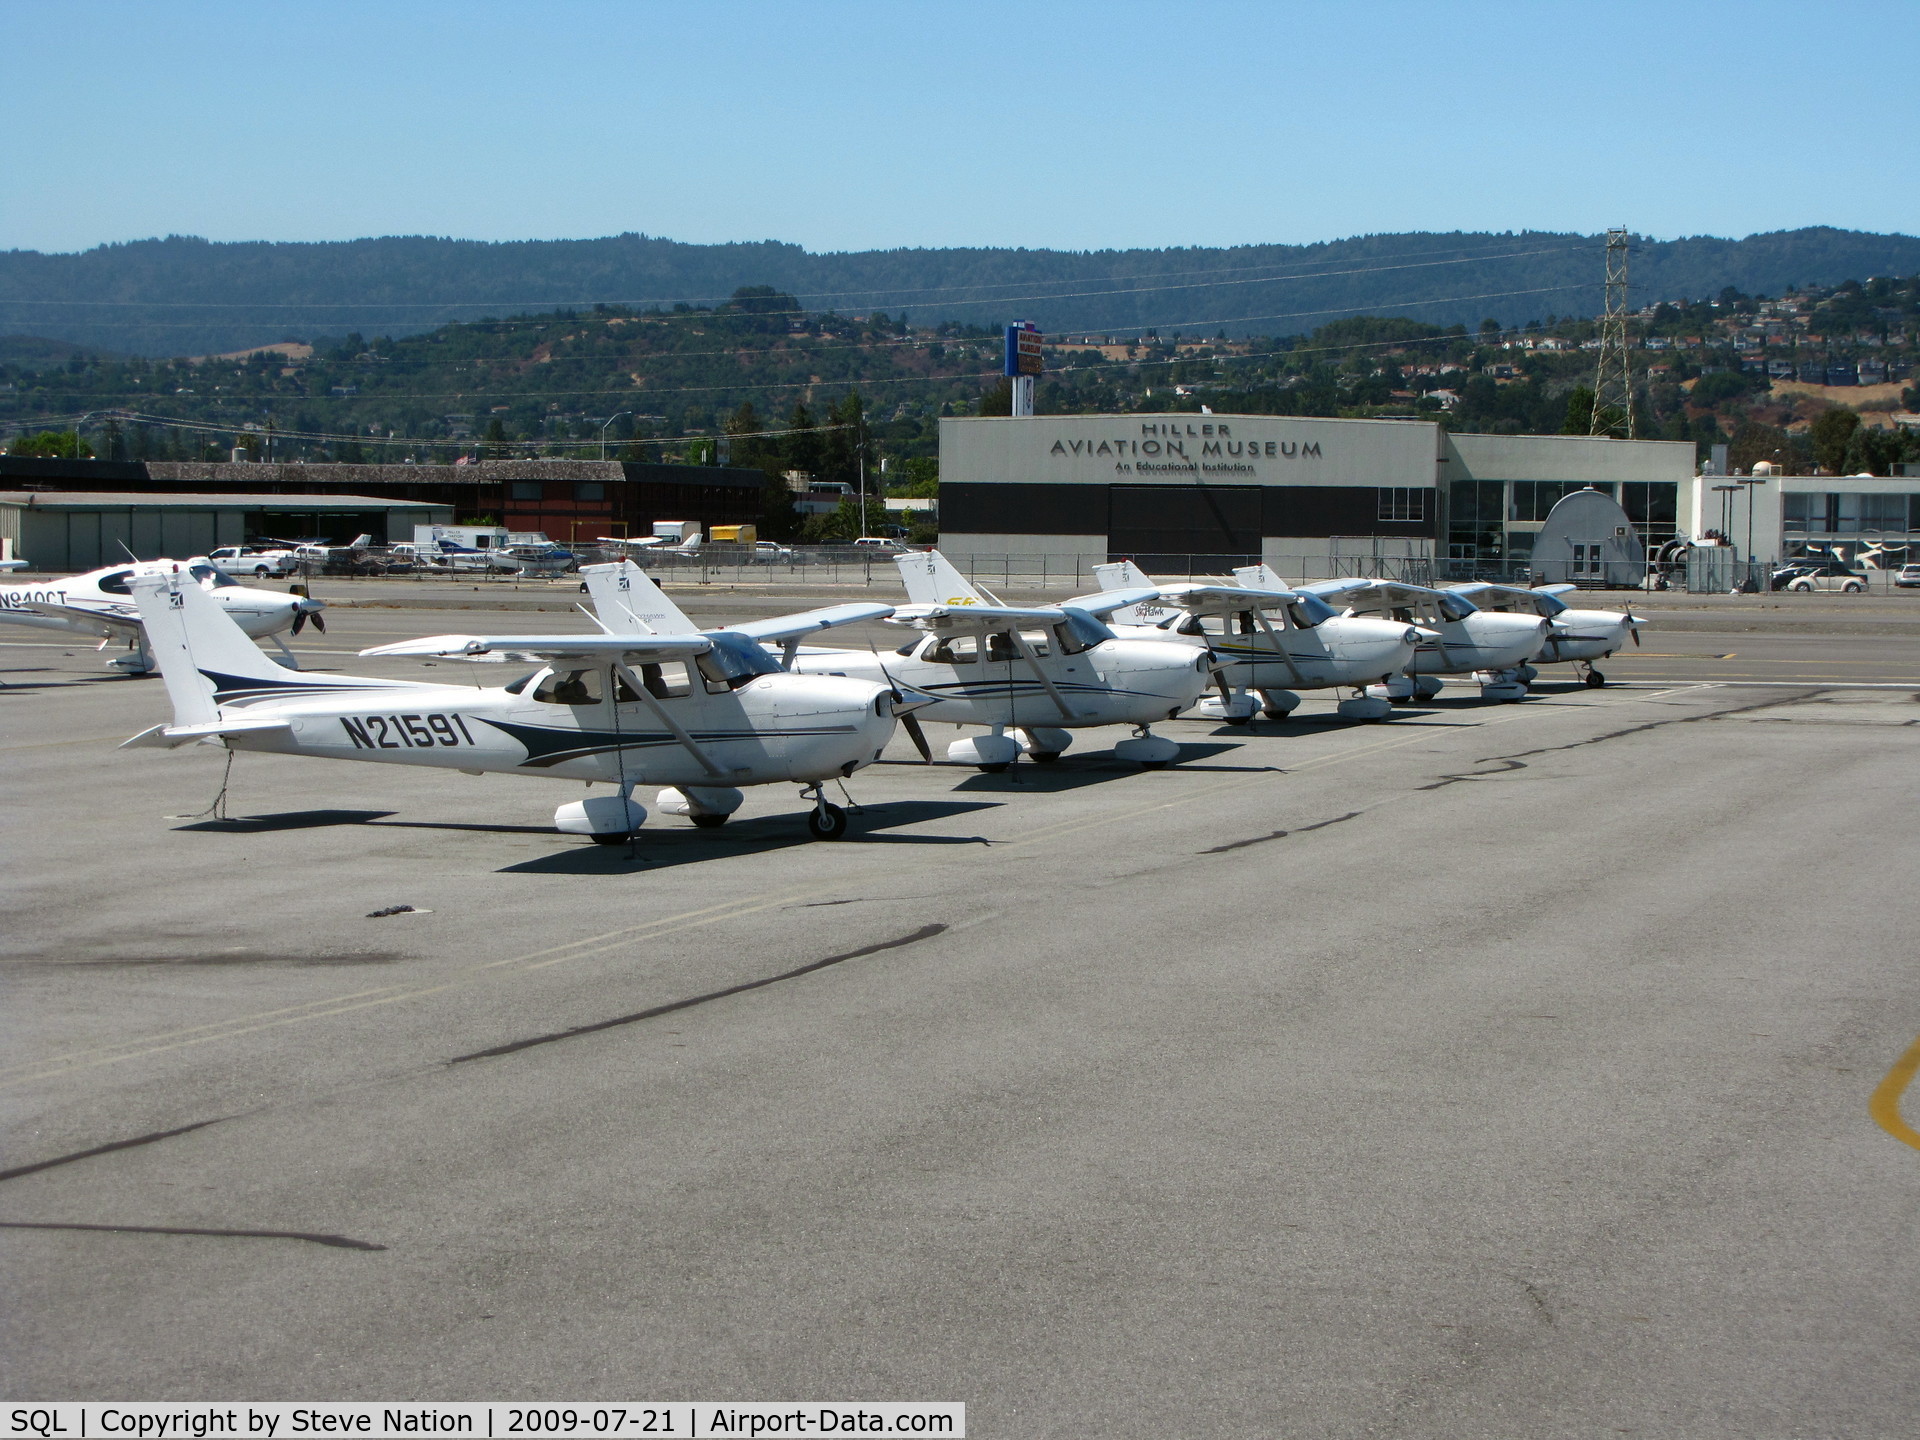 San Carlos Airport (SQL) - A gaggle of Cessnas on the ramp